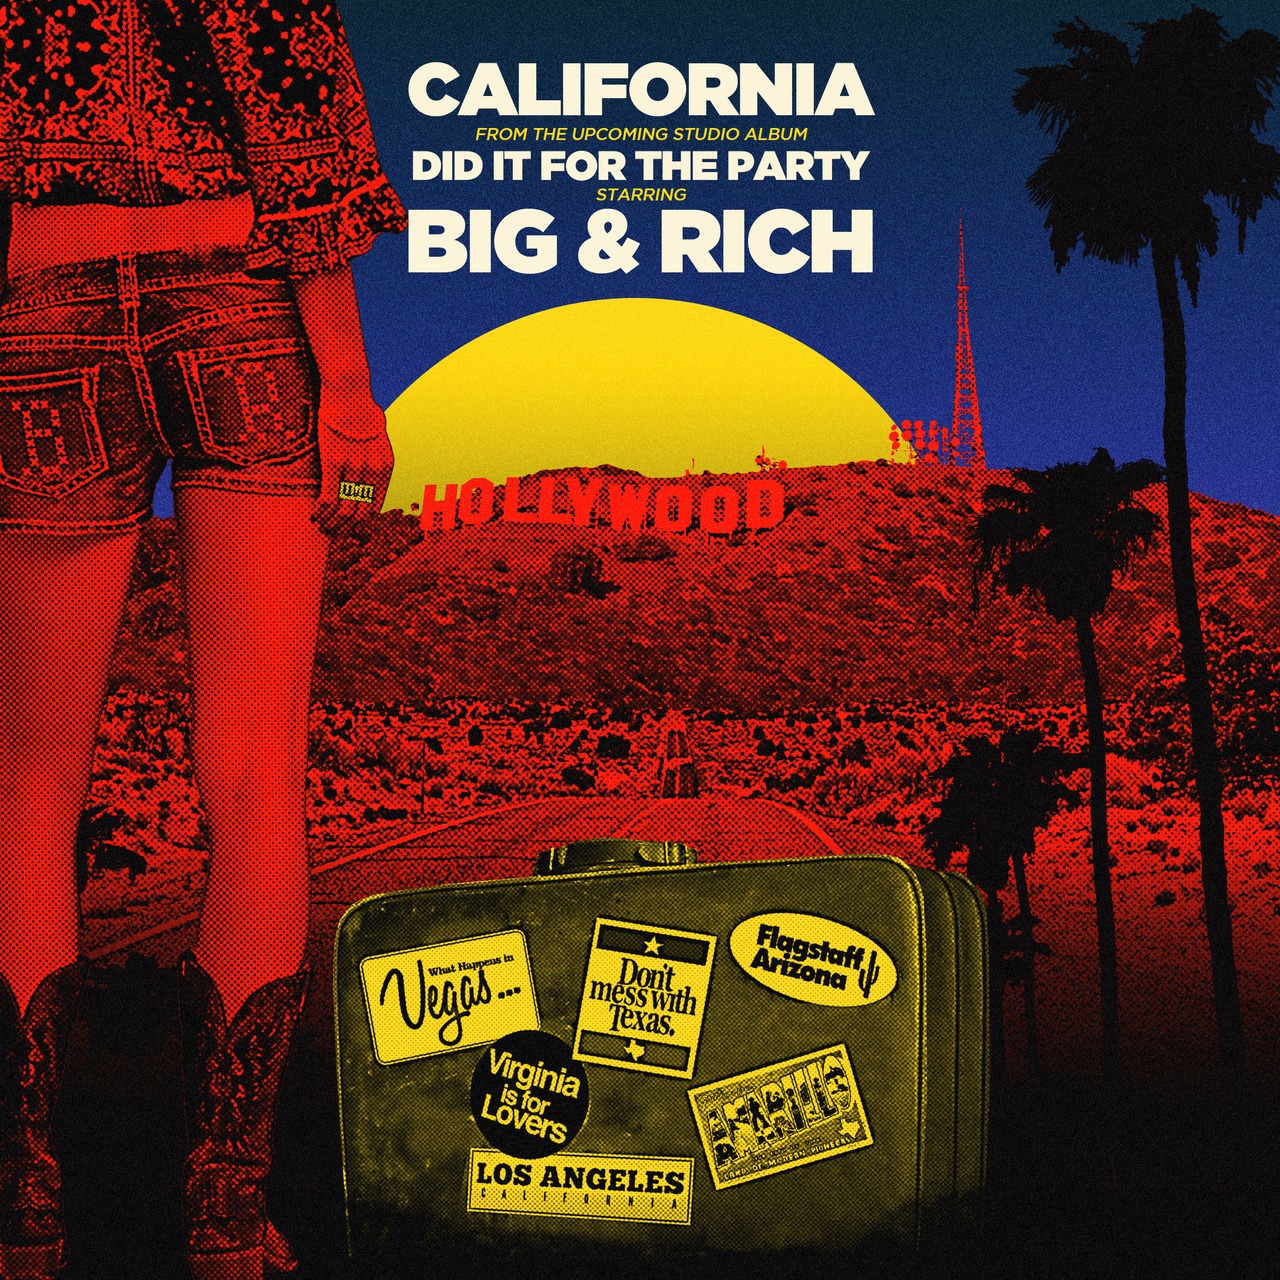 Big & Rich Set To Release New Single "California" March 6